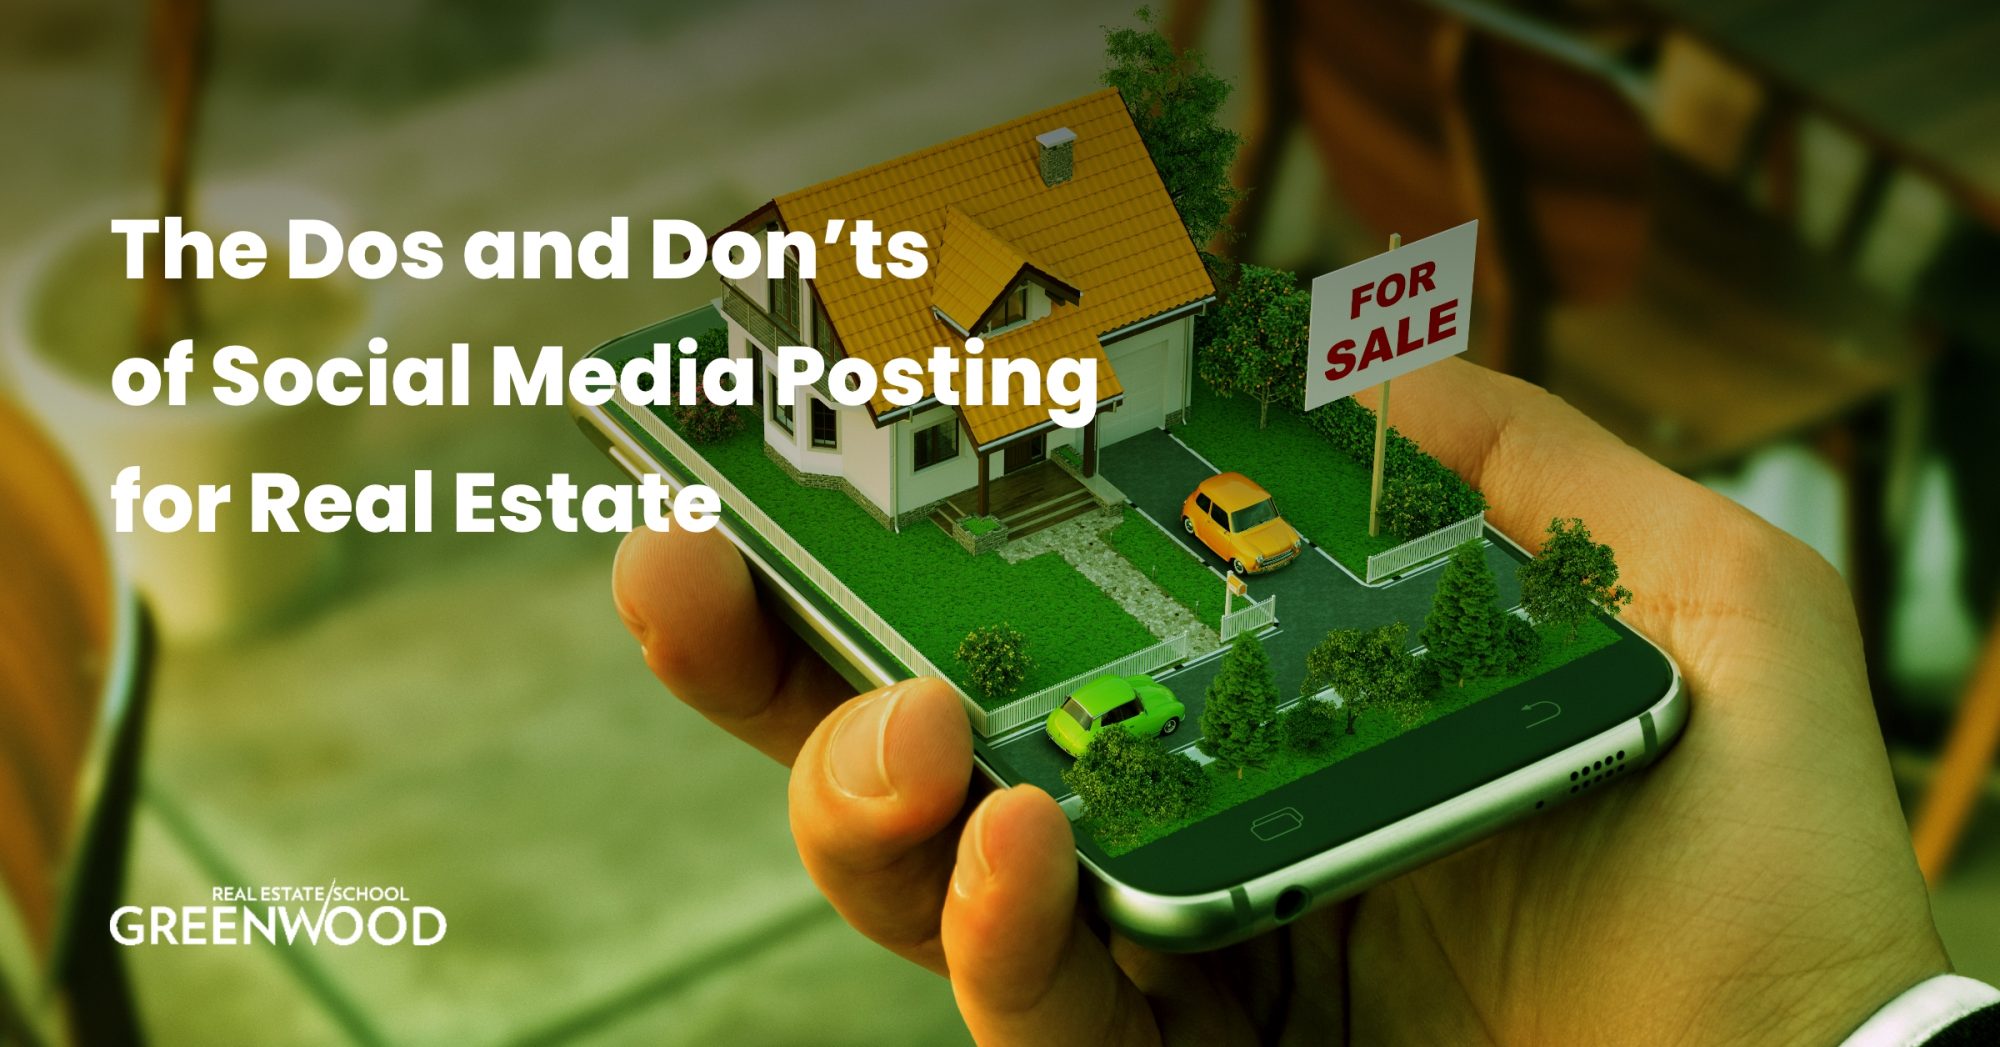 The Dos and Don'ts of Social Media Posting in Real estate